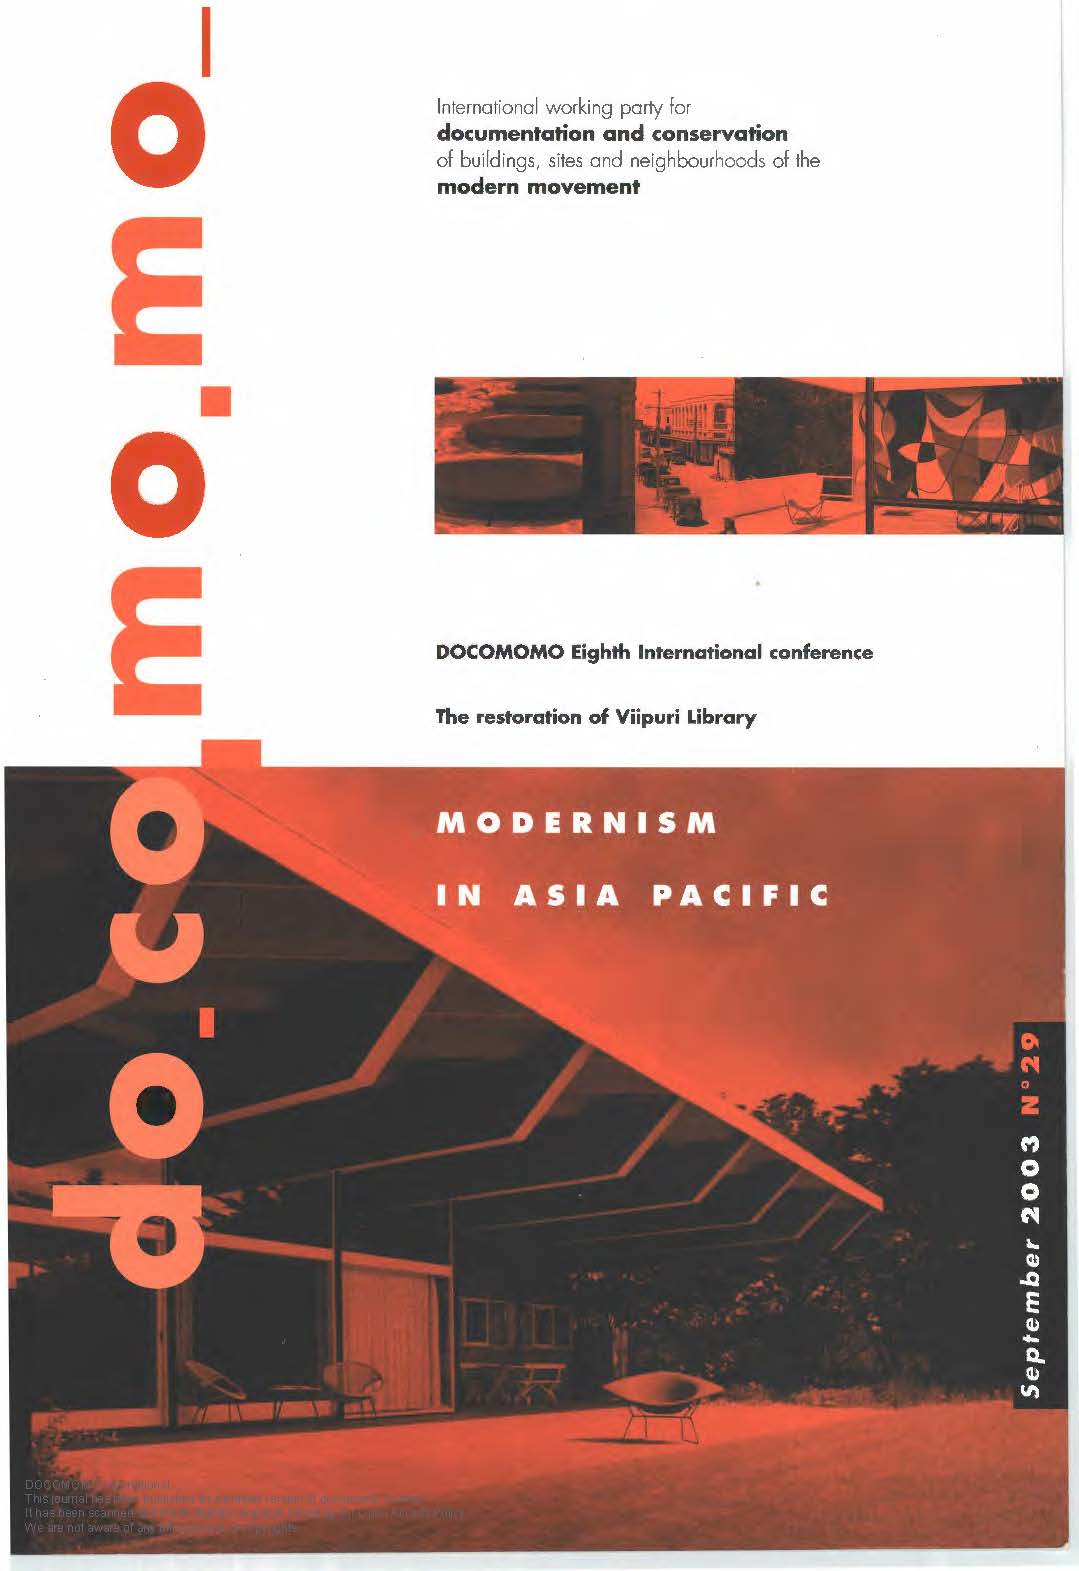 						View No. 29 (2003): Modernism in Asia Pacific
					